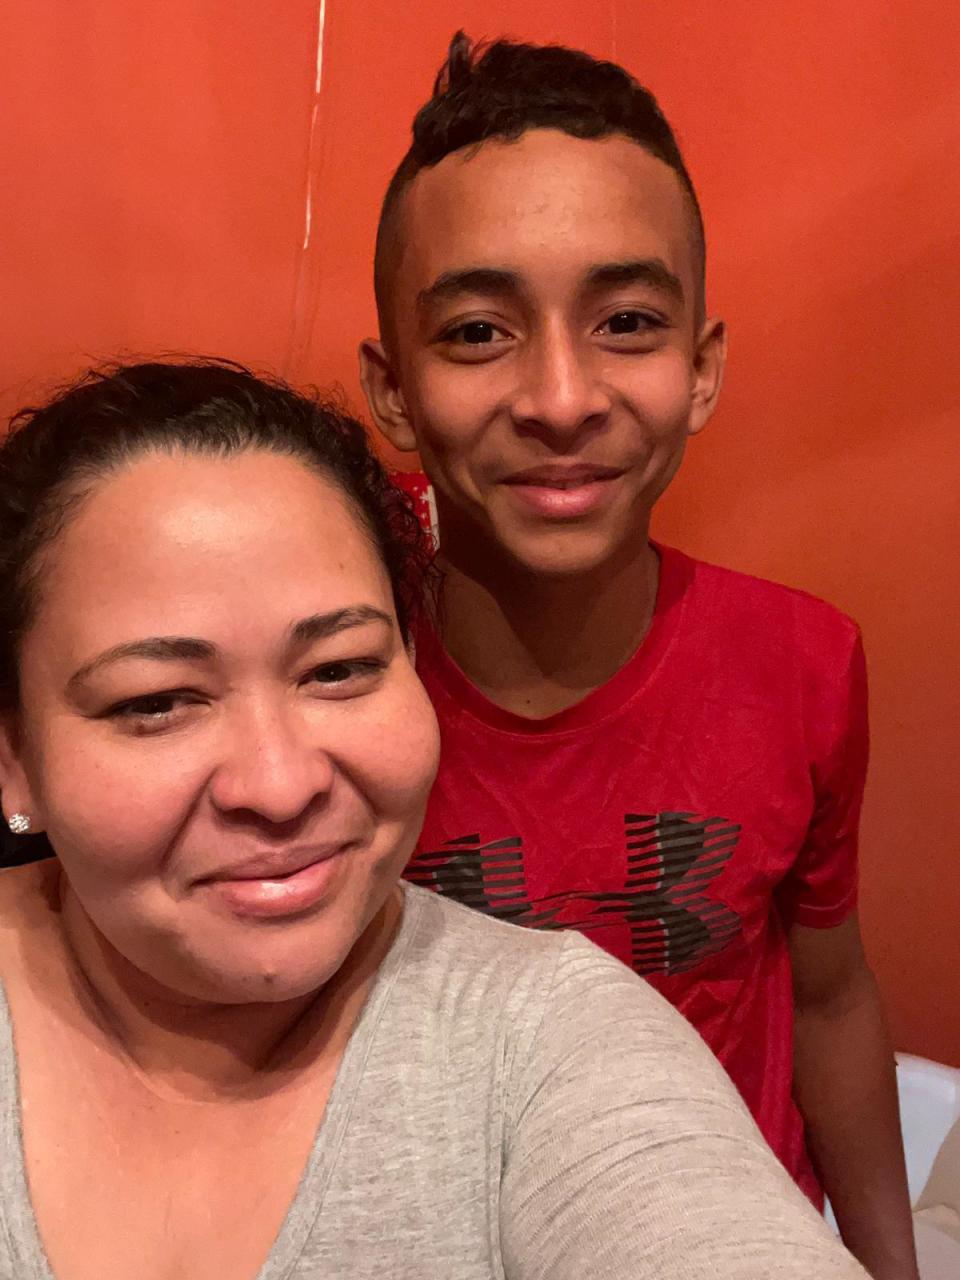 María and Elmer, 14, in New Haven, Connecticut. They reunited earlier this month after a more than 2-year separation. / Credit: Photo provided to CBS News